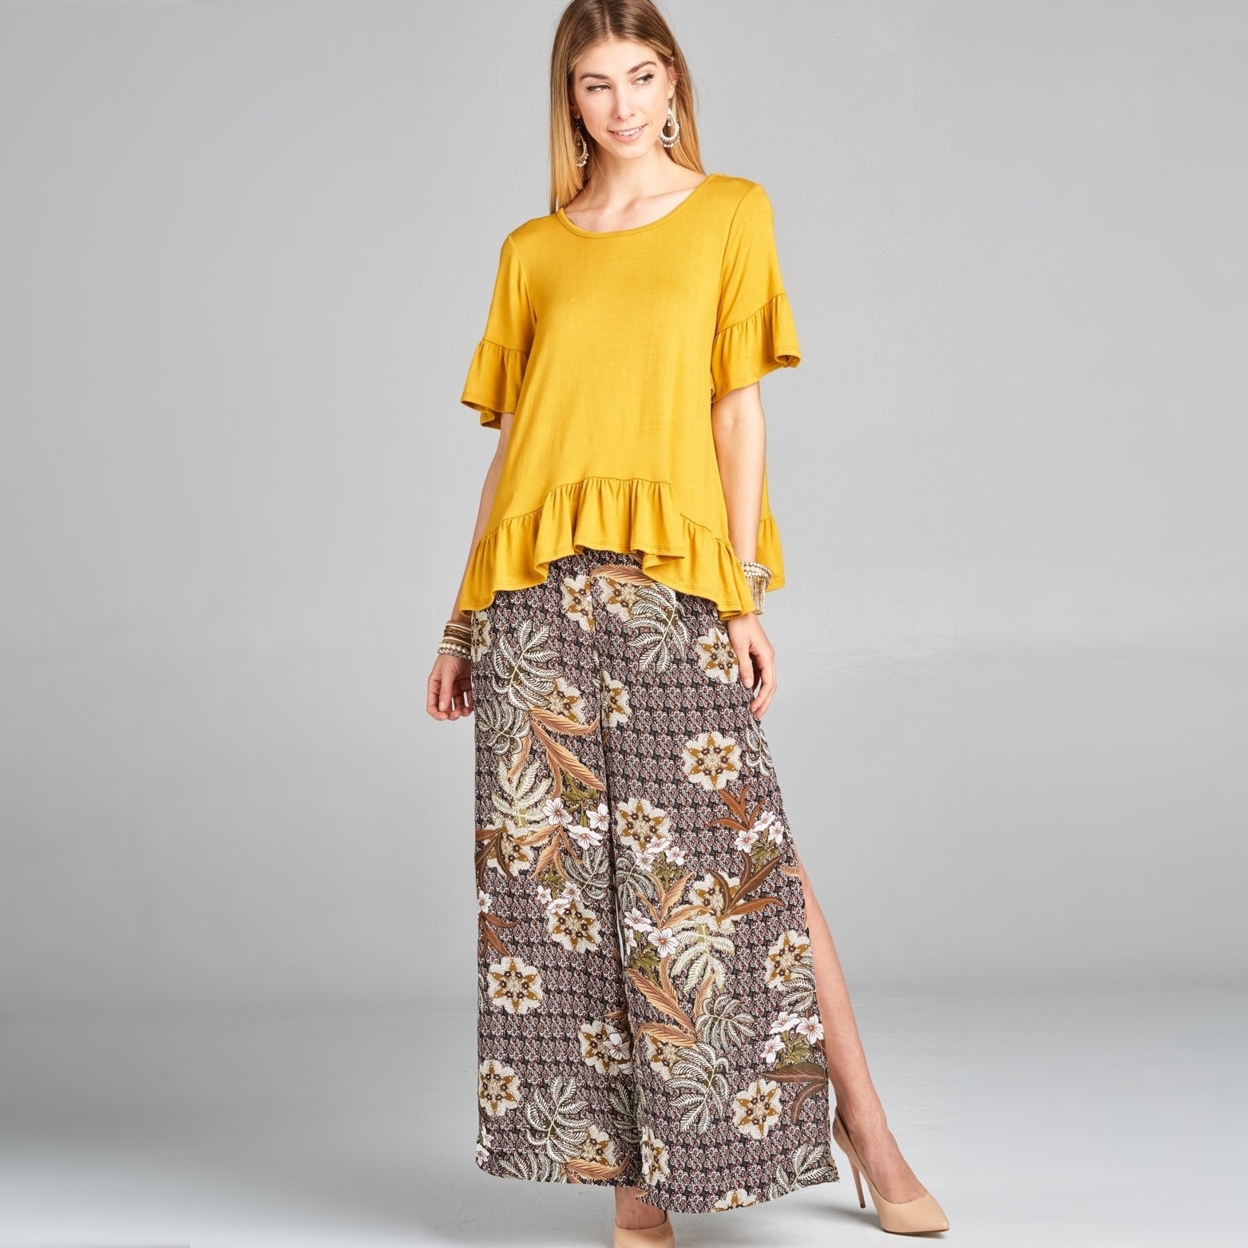 Olive Floral Palazzo Pants - Olive, Large (12-14)